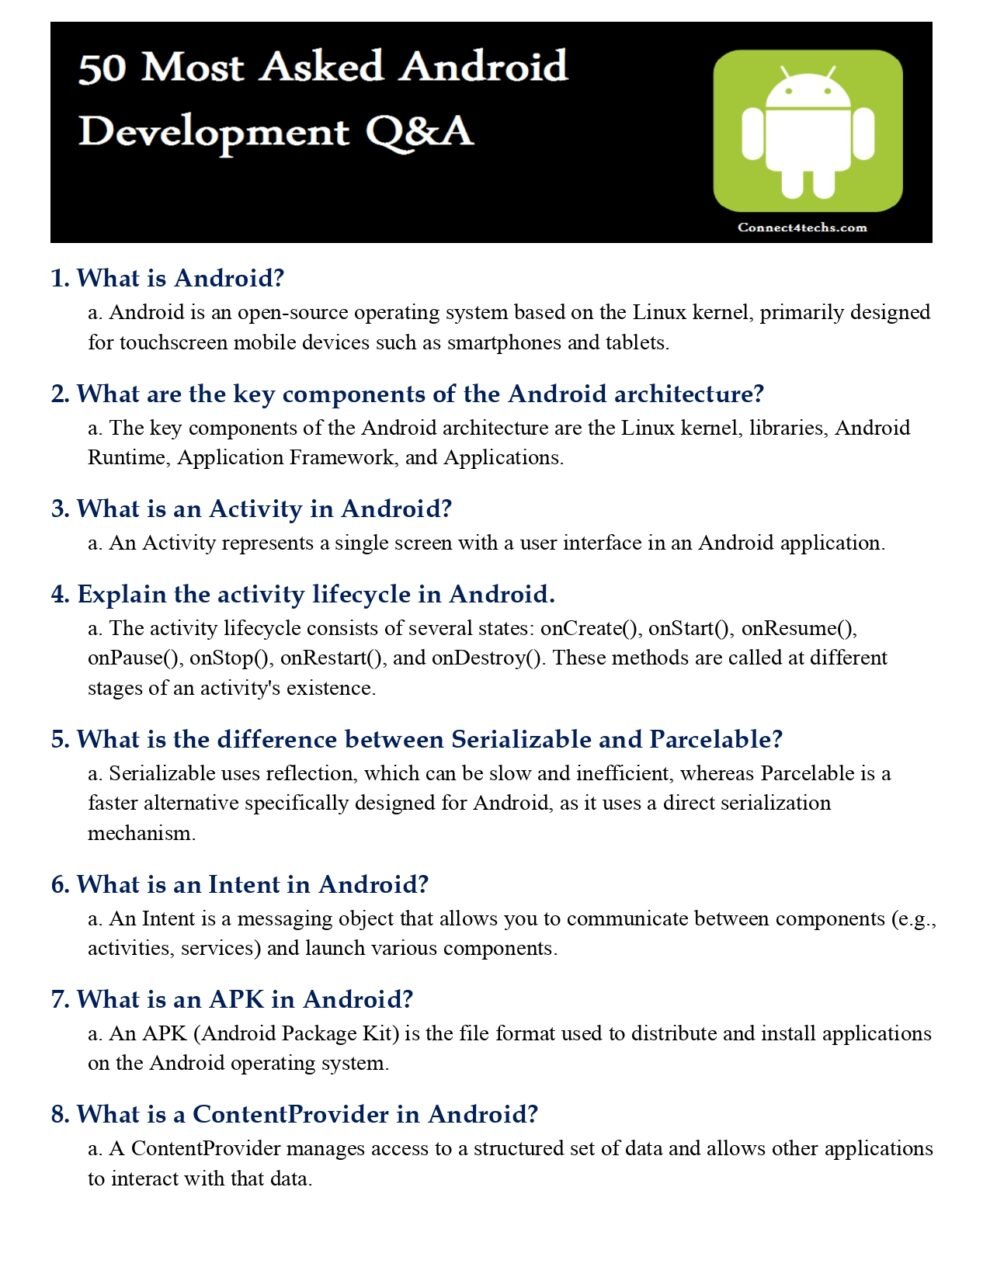 Most Asked Android Interview (50 Q&A) PDF